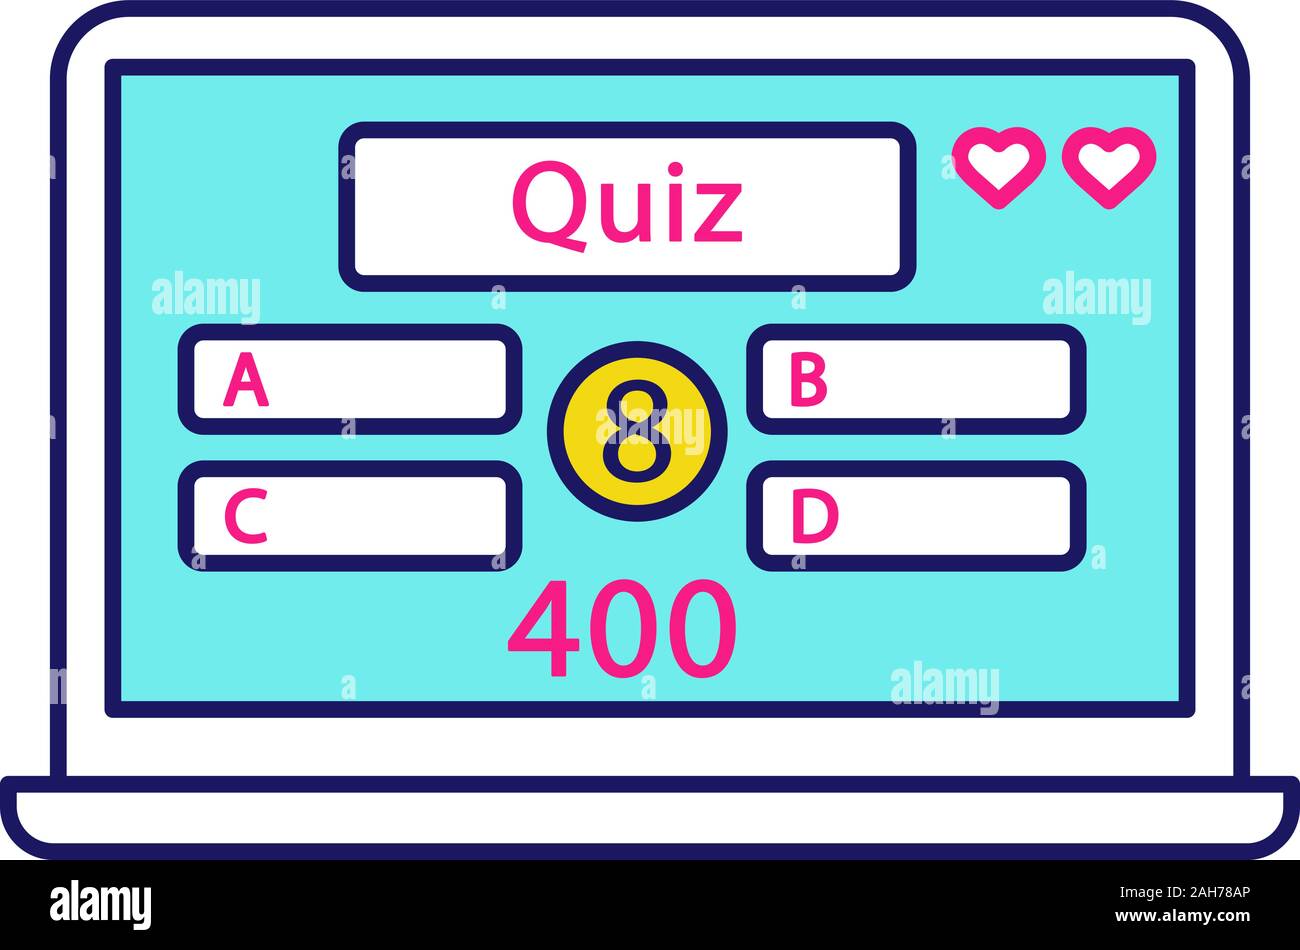 Play Quizizz!  Cute icons, Game codes, Quizzes